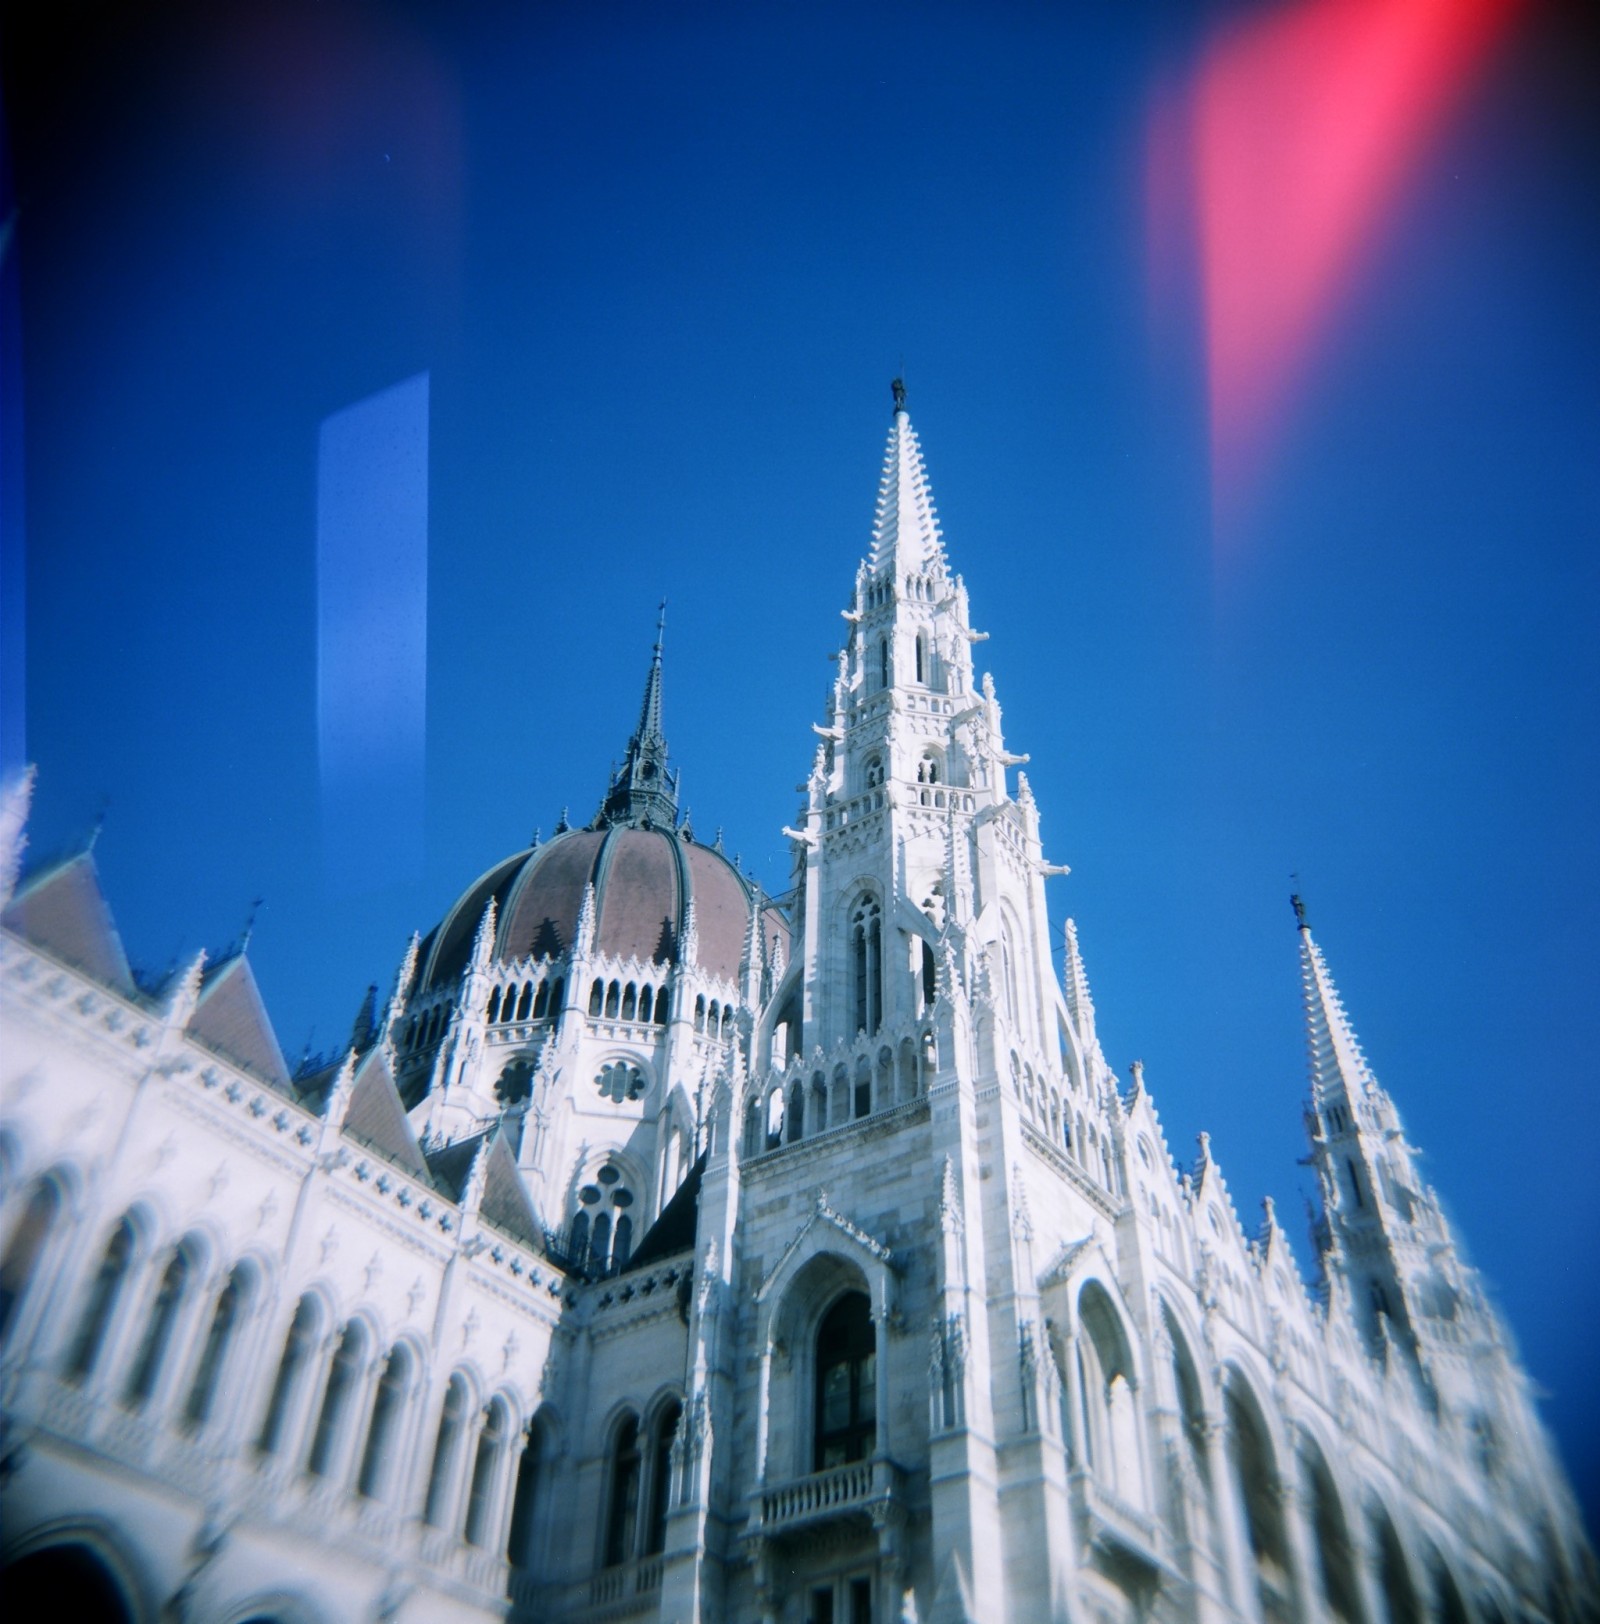 Budapest Parliament, taken with a Holga 120N on 120 colour film